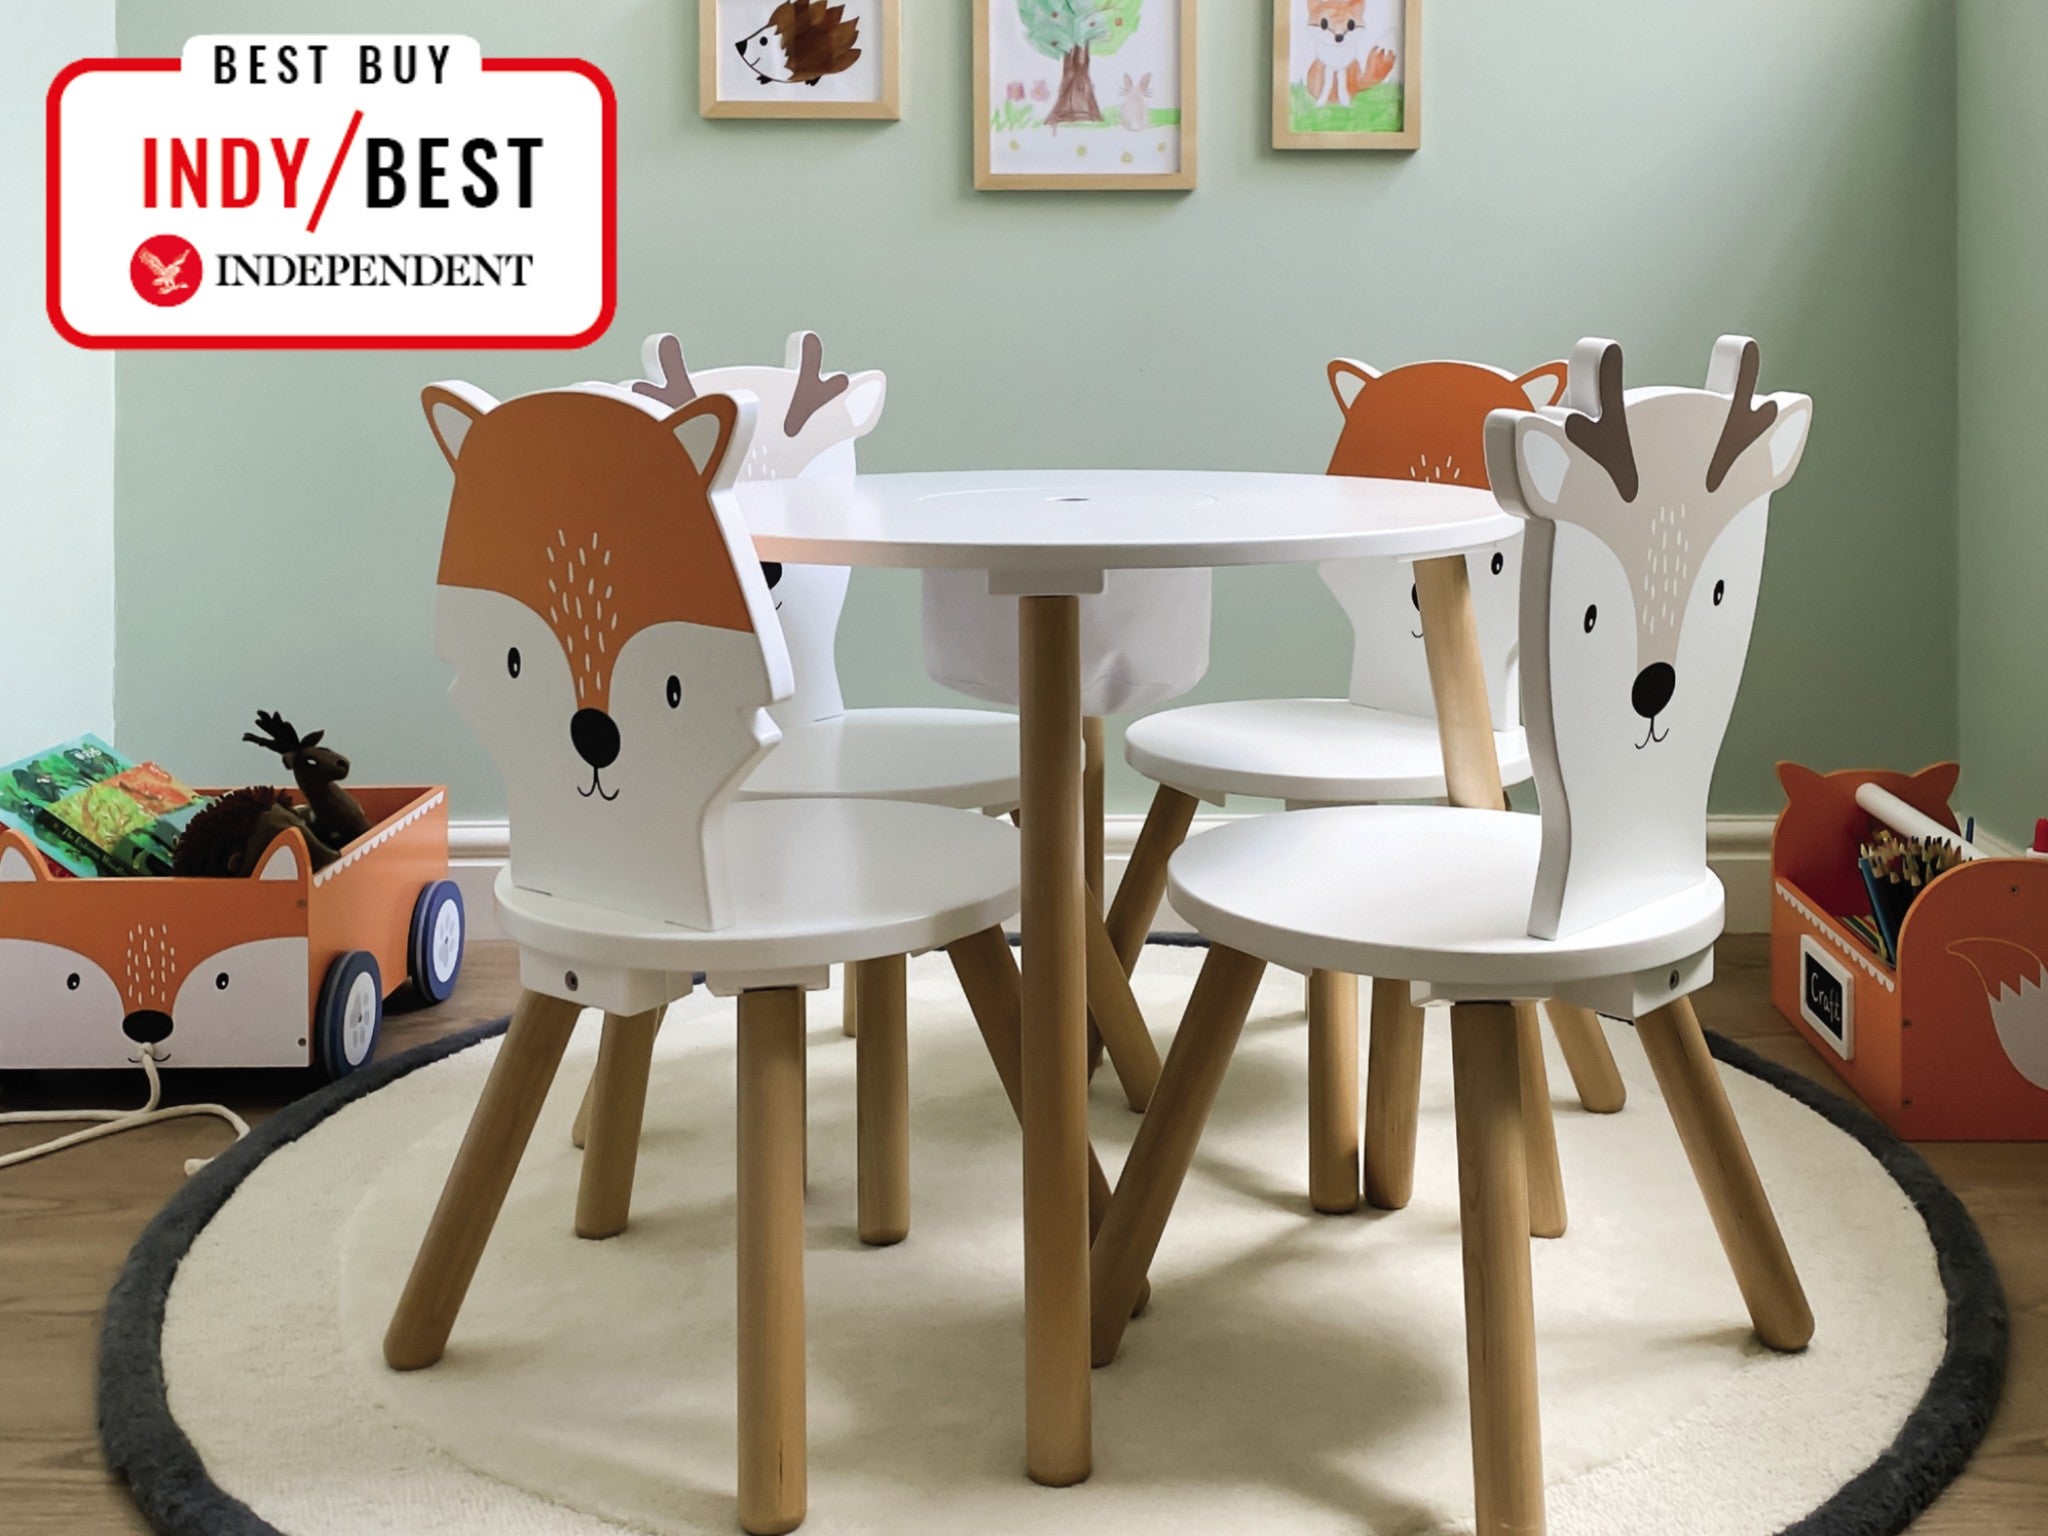 IB-Style Table and chairs Luca Color Wooden Set Kids Toddlers Furniture Toy 